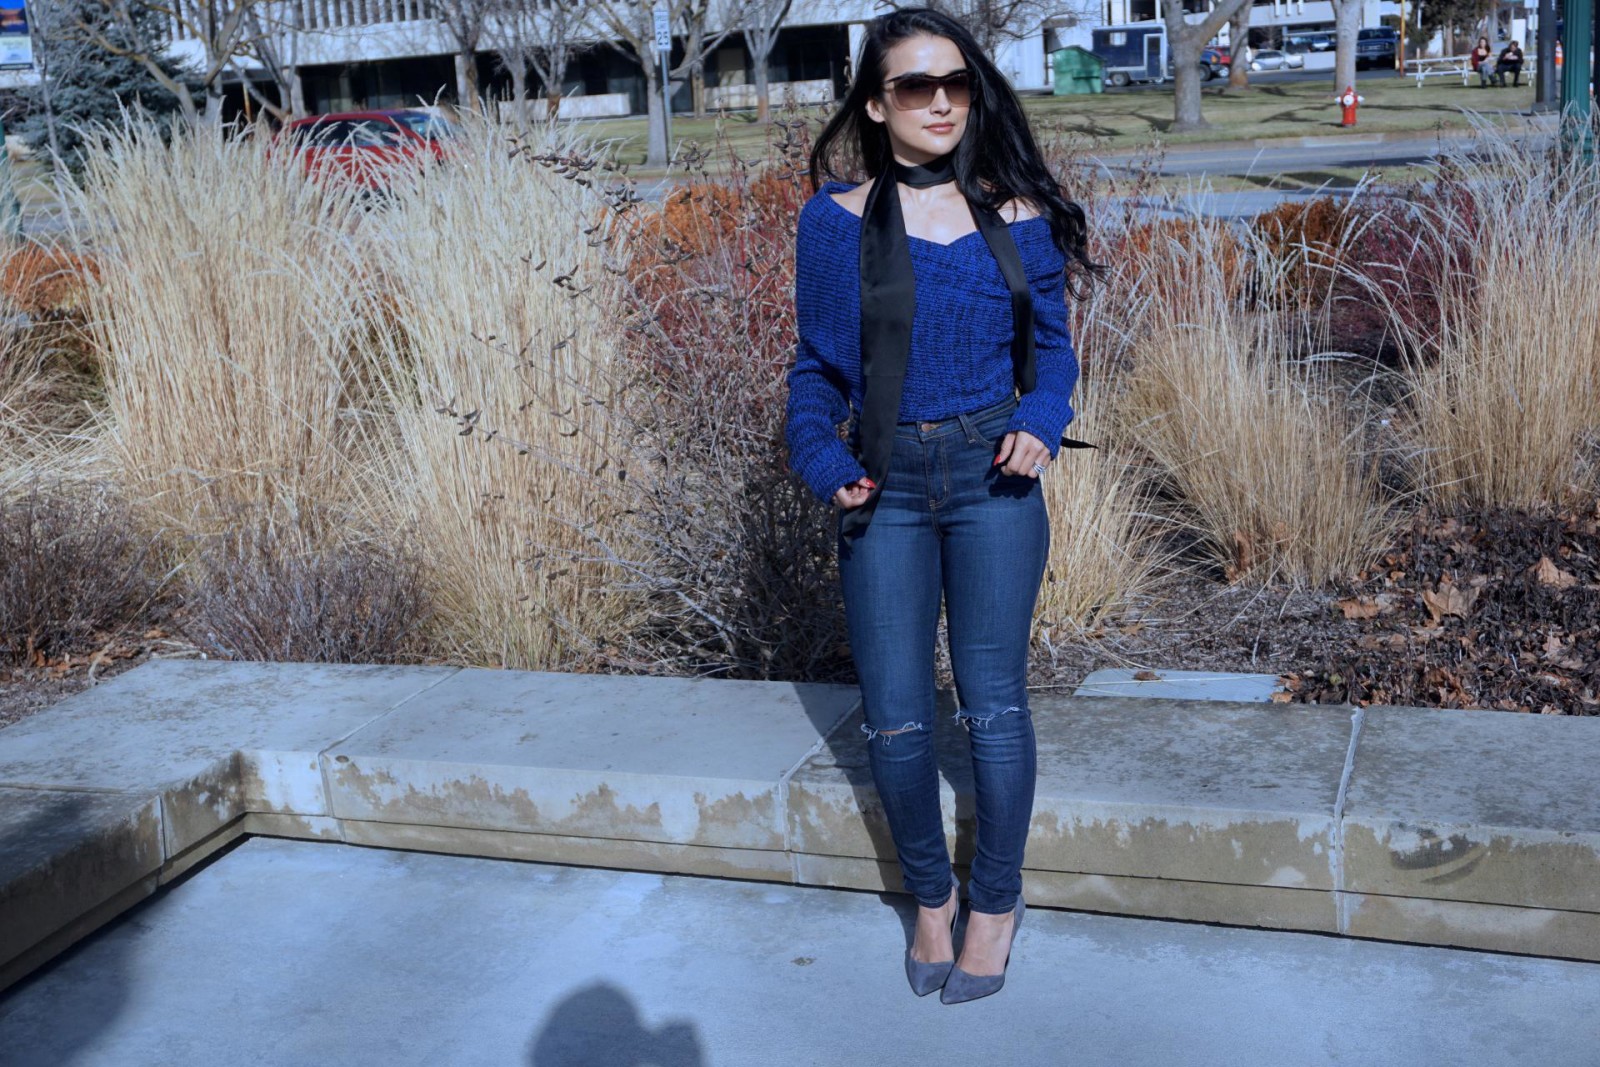 SheIn.com, Blue Boat Neck Cross Front Crop Sweater, Satin Skinny Tie Scarf, URBAN OUTFITTERS, STEVE MADDEN SUEDE GREY PUMPS, ROYAL BLUE, NECESSARY CLOTHING JEANS